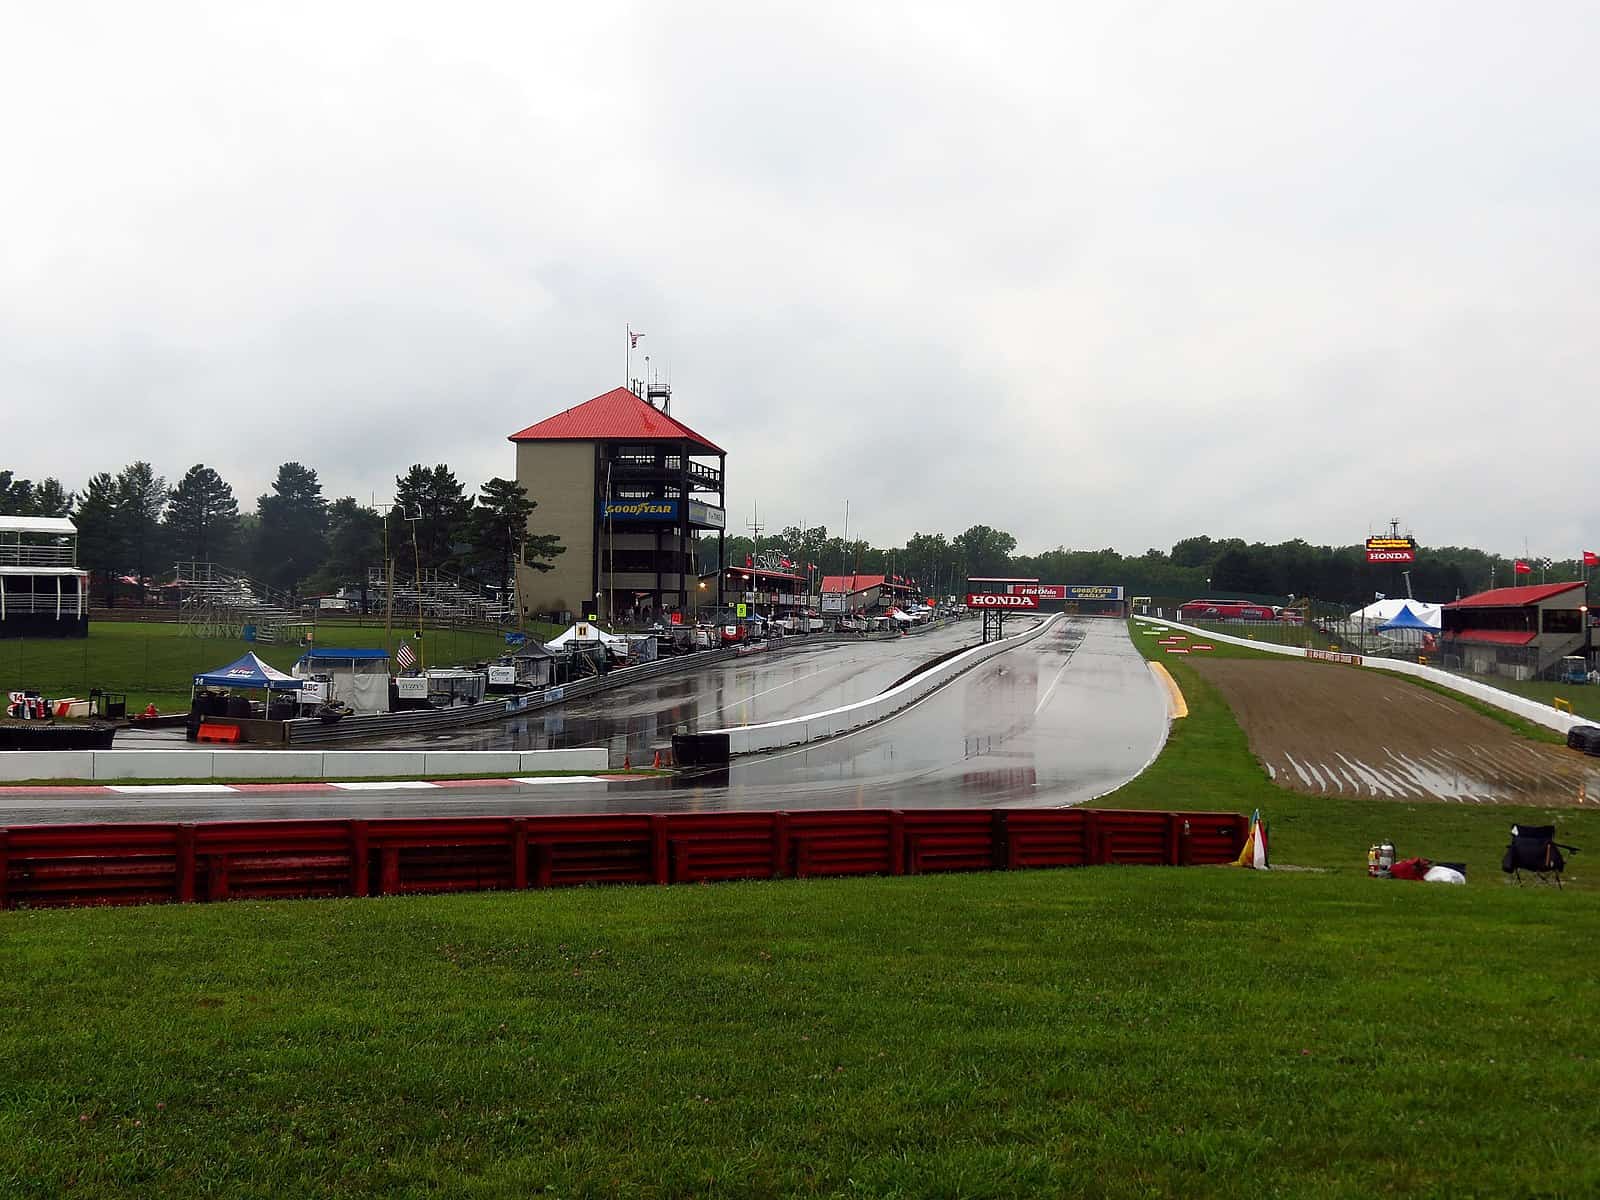 Mid-Ohio Sports Car Course 7721 Steam Corners Rd Lexington, OH 44904 - Pic of Race track